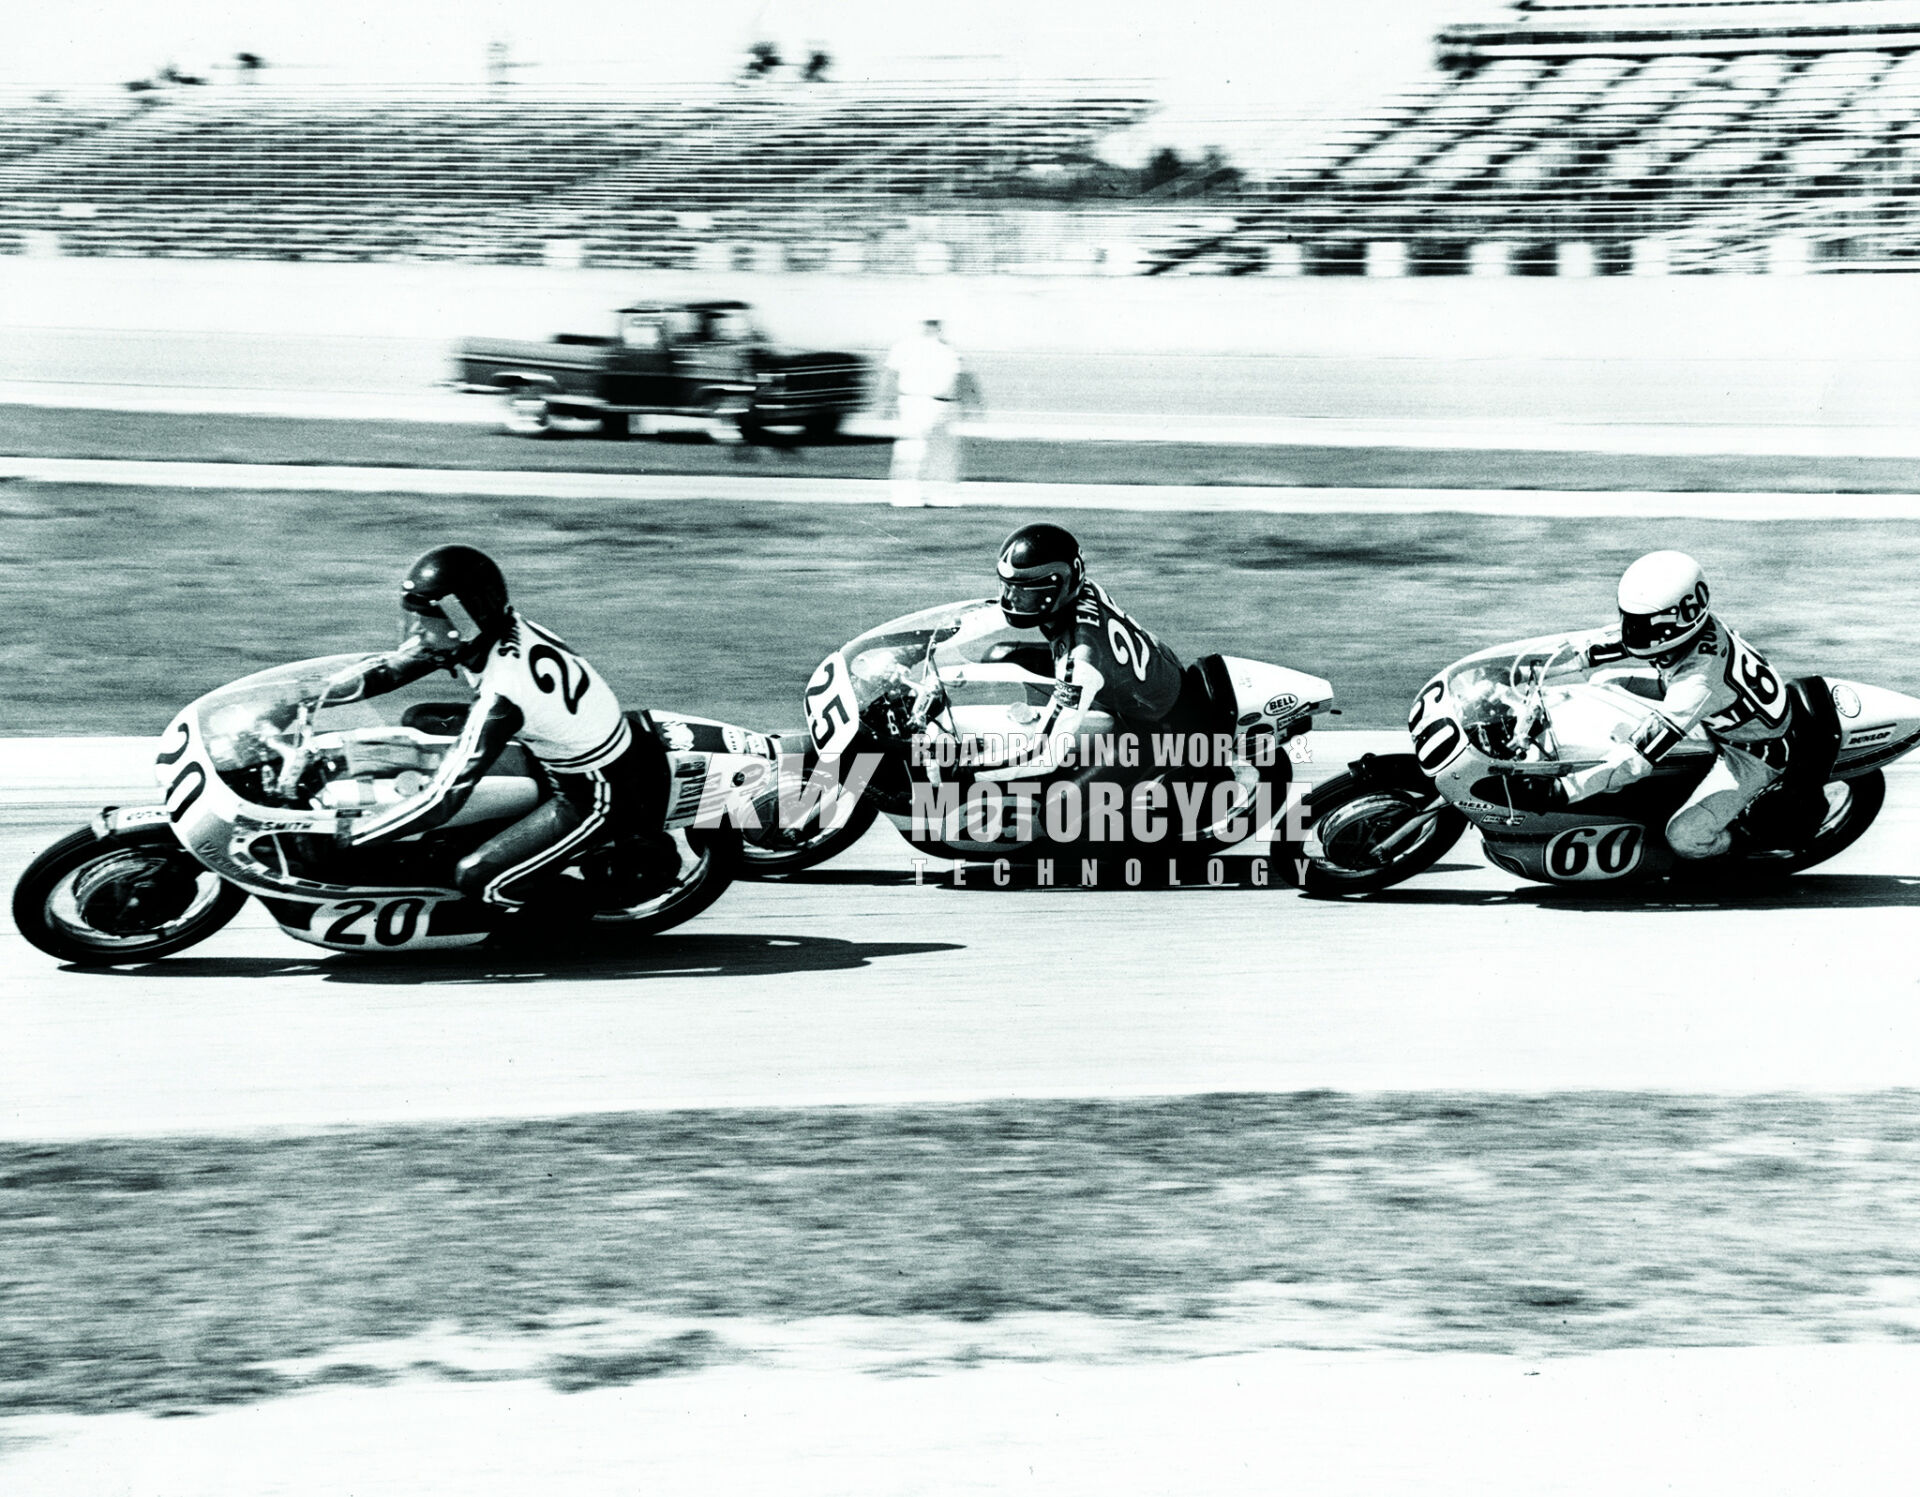 Don Emde (25), a young Kenny Roberts (60), and Dave Smith (20) battled for victory in the 100-mile 250cc race at Daytona International Speedway, the day before the 200. Smith beat Roberts, while Emde crashed out. Photo by Dave Friedman/Courtesy Don Emde Collection.